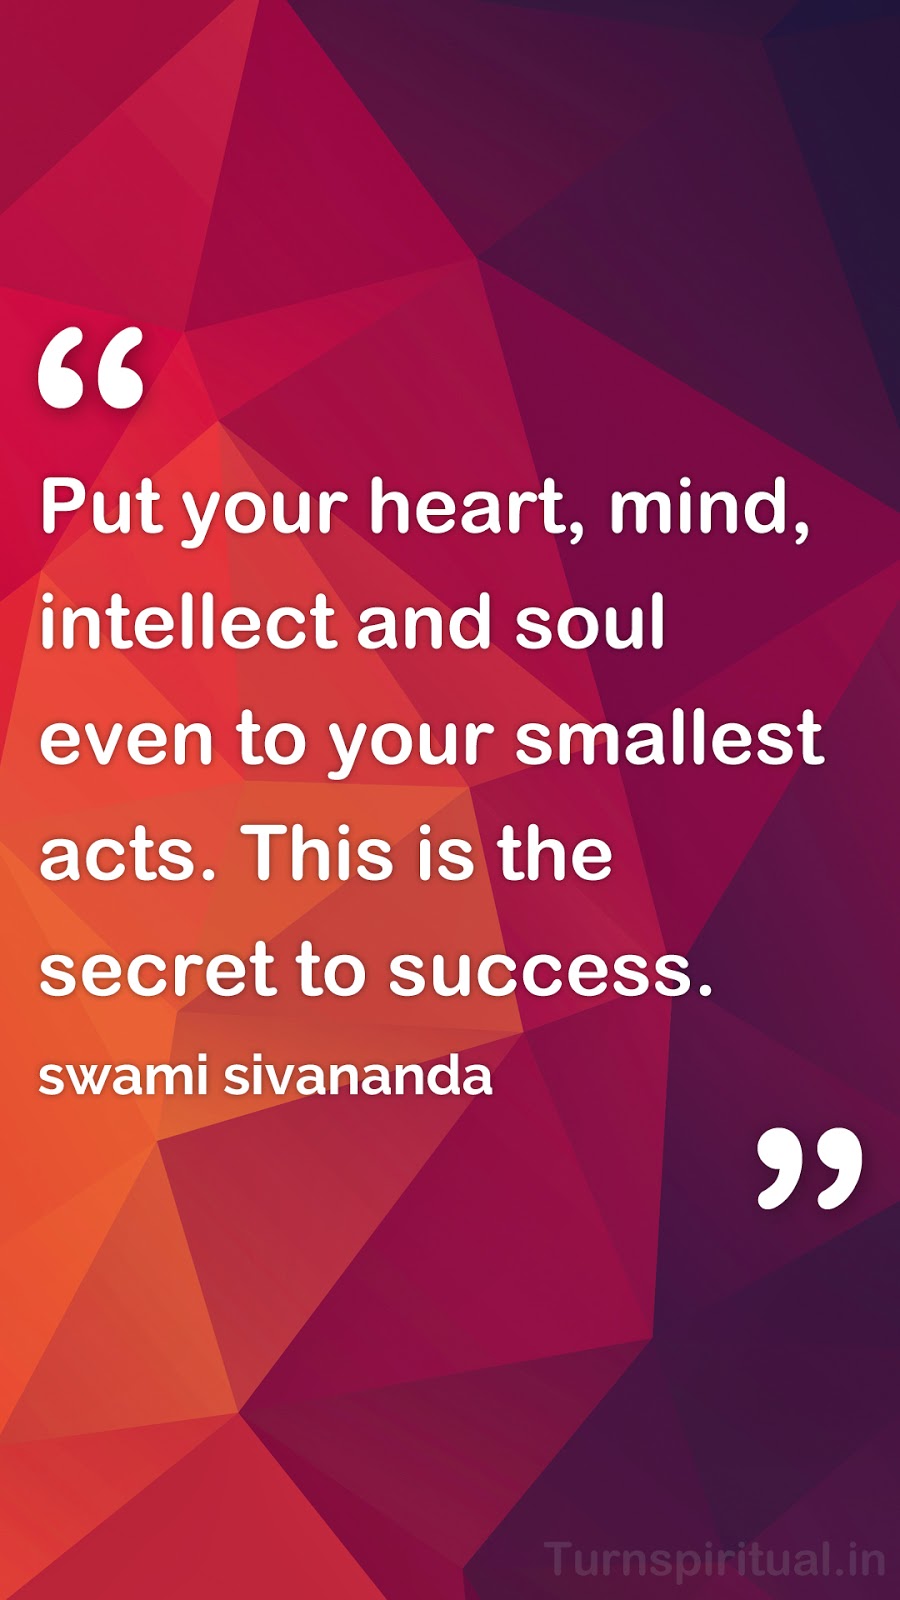 Good Morning 3d Source · 6 Lowpoly HD mobile wallpapers of Swami Sivananda Quotes Free Download Turnspiritual in